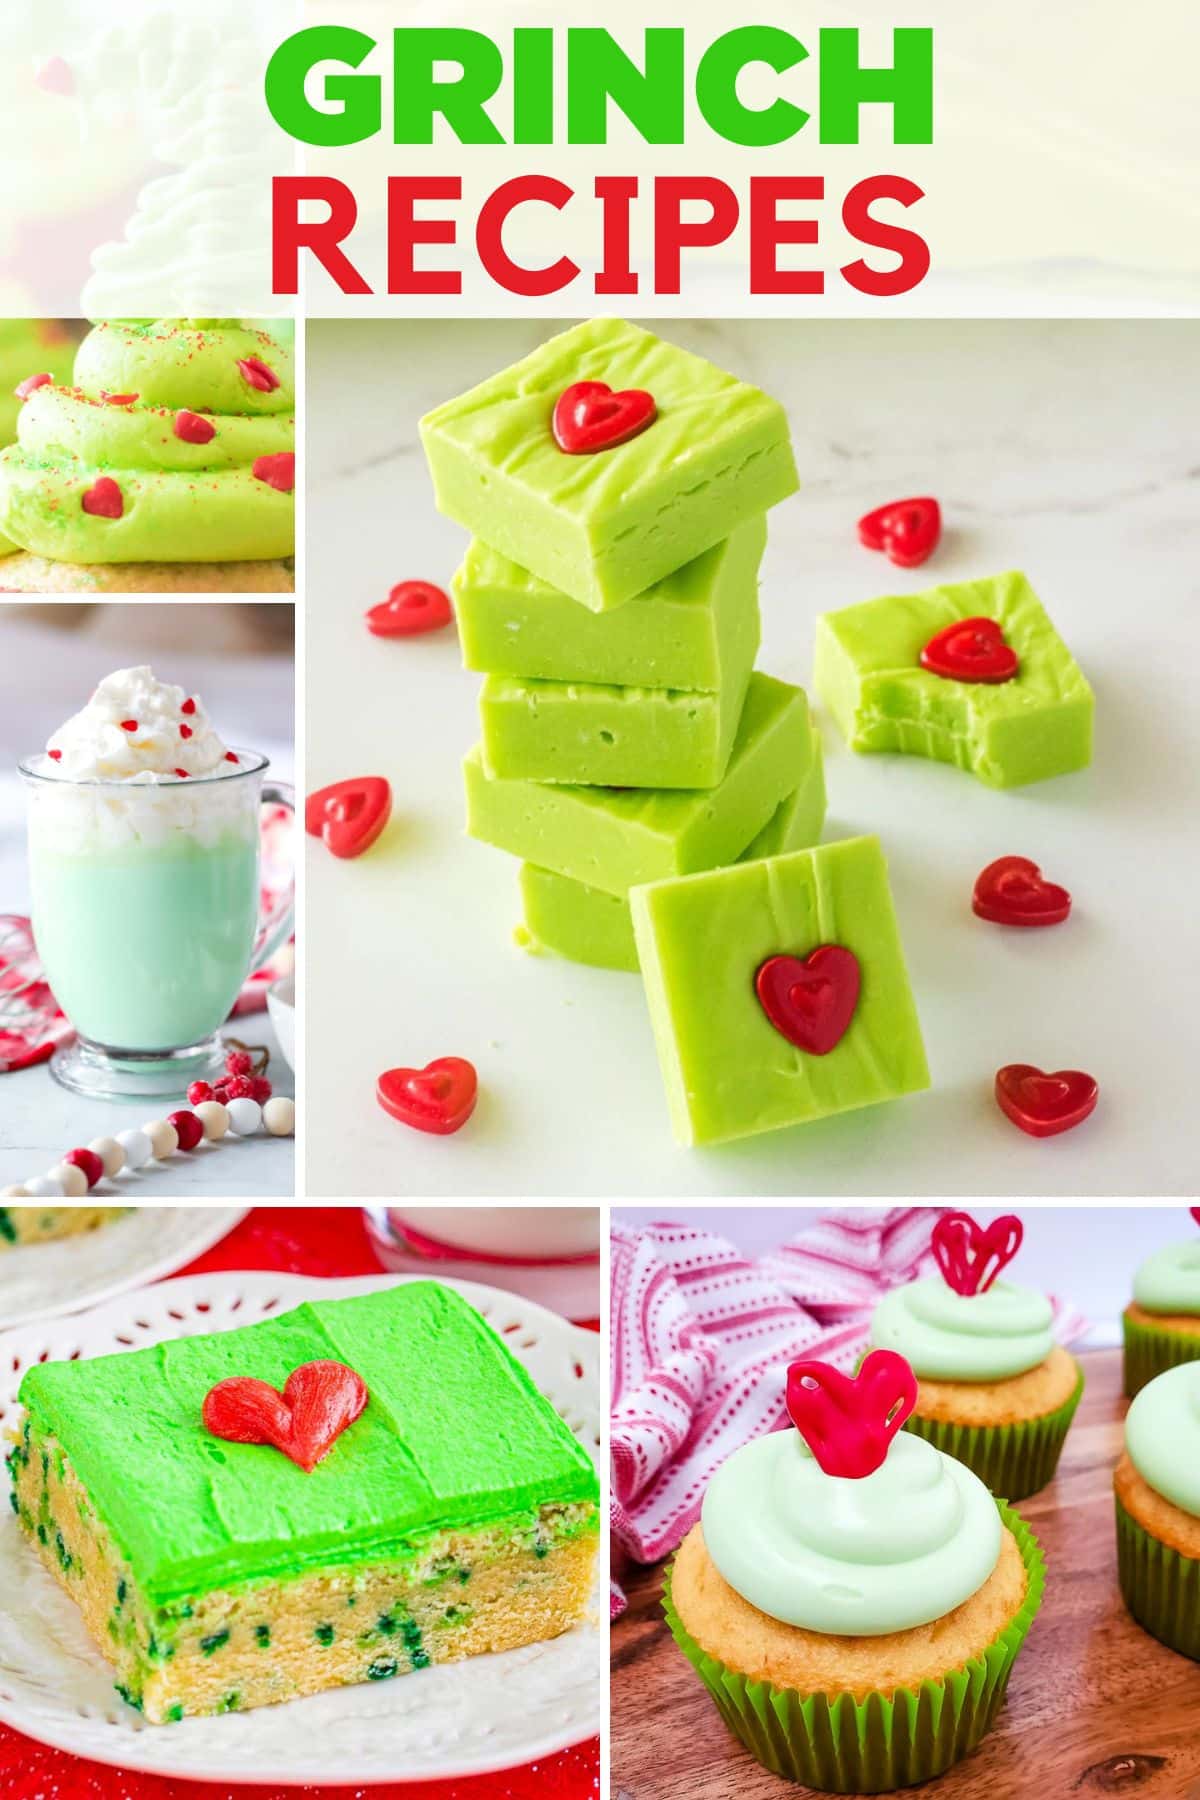 20 Amazing Grinch Desserts. We love sweet treats at holiday parties and Grinch desserts add so much color and are a fun treat to celebrate the holiday season.